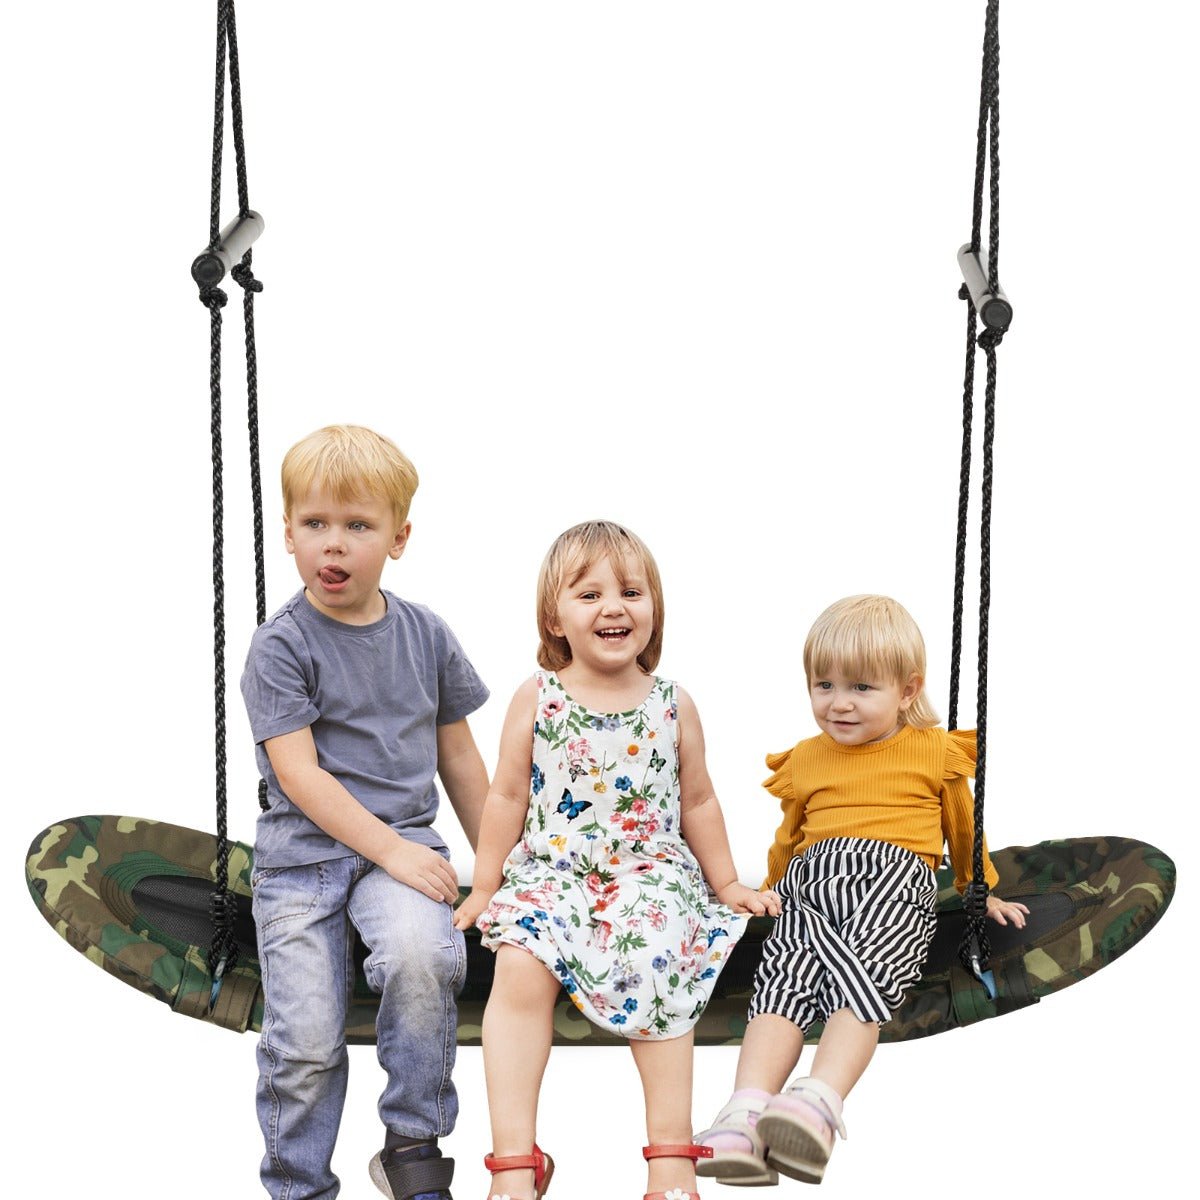 Platform Swing with Adjustable Height: Soft Handles for Playful Adventure